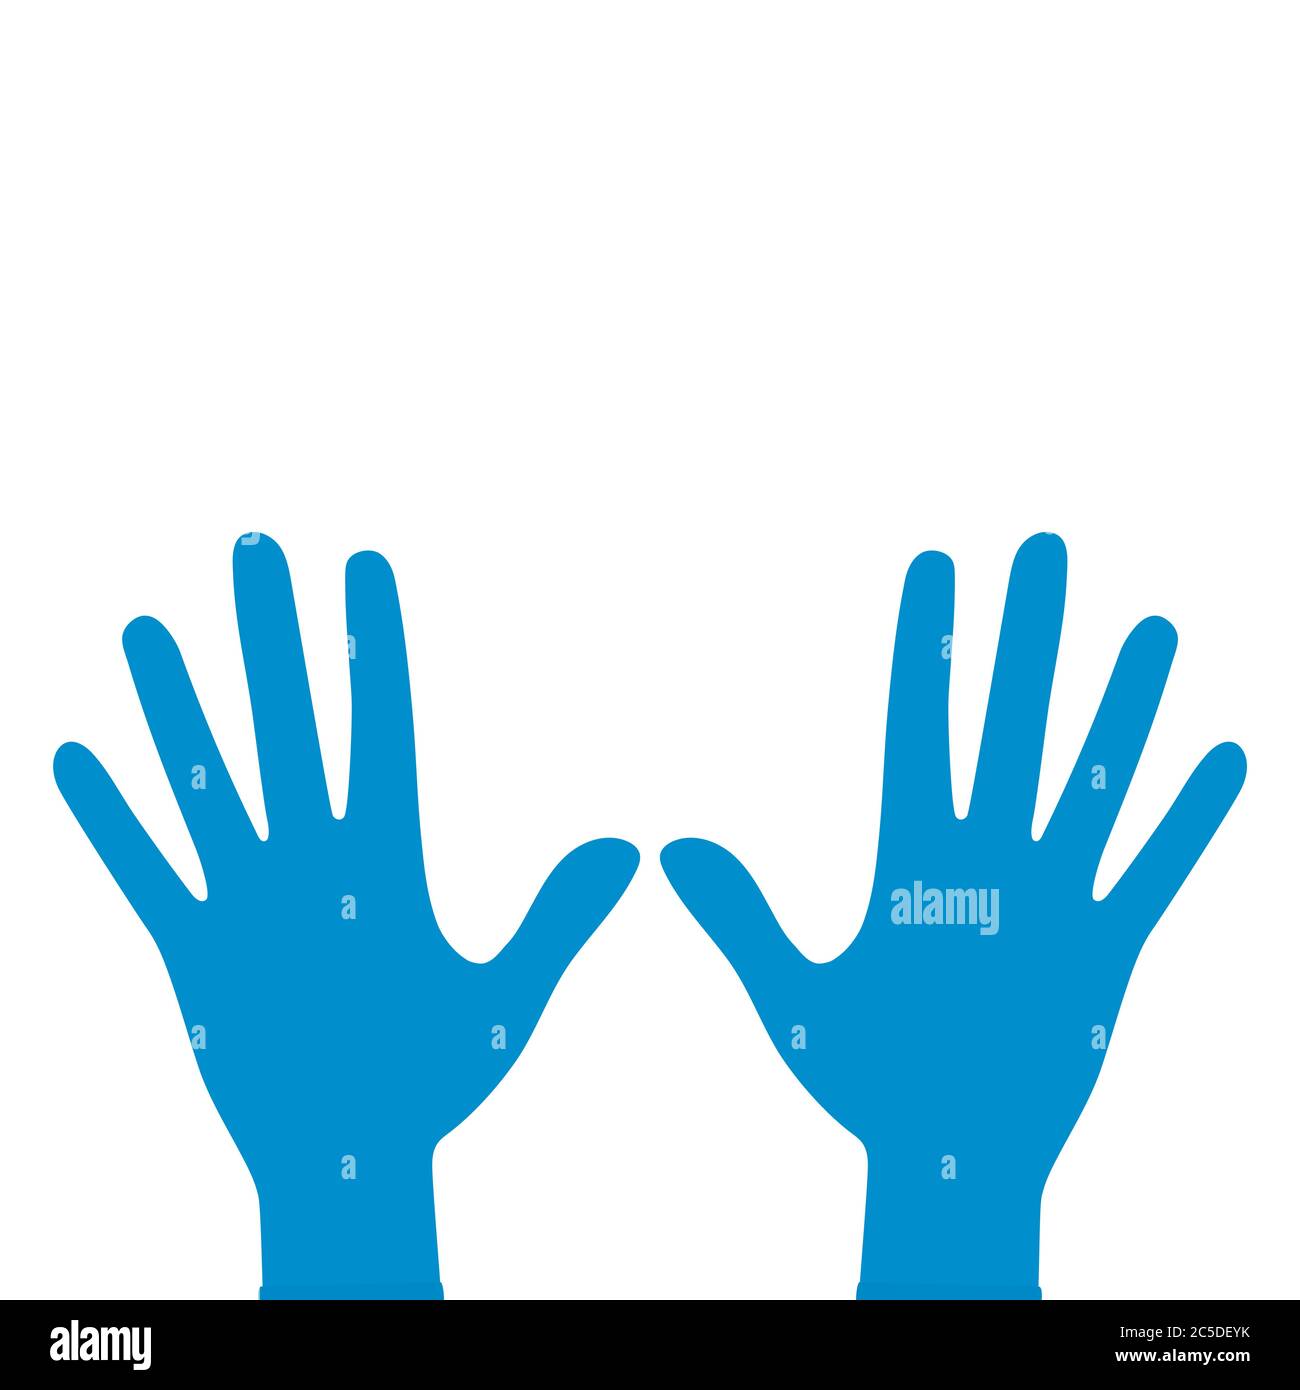 Hands in rubber medical gloves, protection against viruses and bacteria. Flat illustration, vector Stock Vector